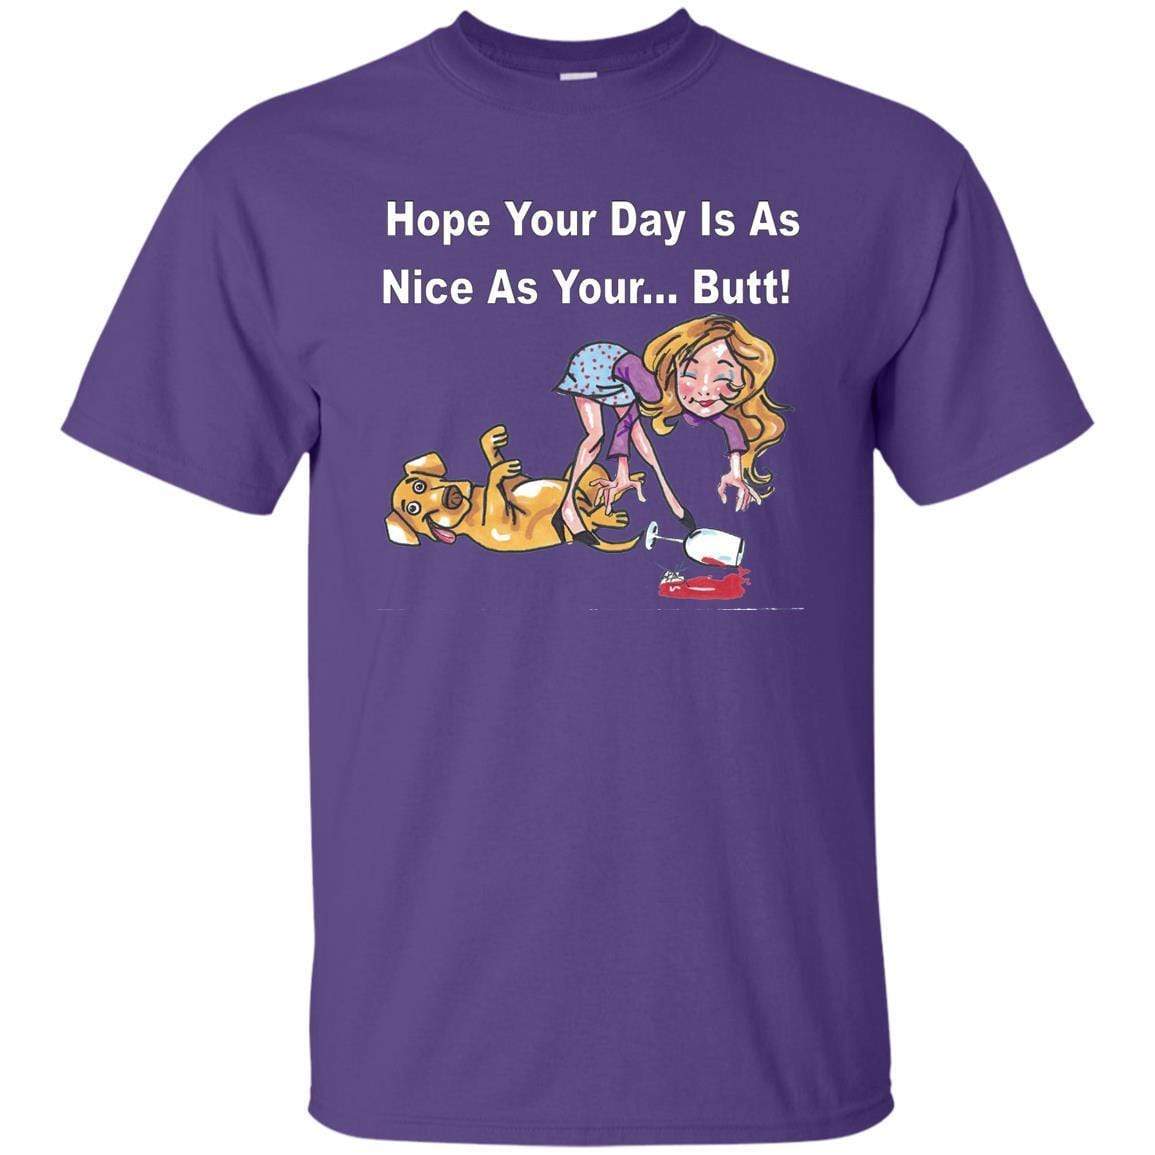 T-Shirts Purple / S WineyBitches.co "Hope Your Day Is As Nice As Your...Butt" White Lettering Ultra Cotton T-Shirt WineyBitchesCo